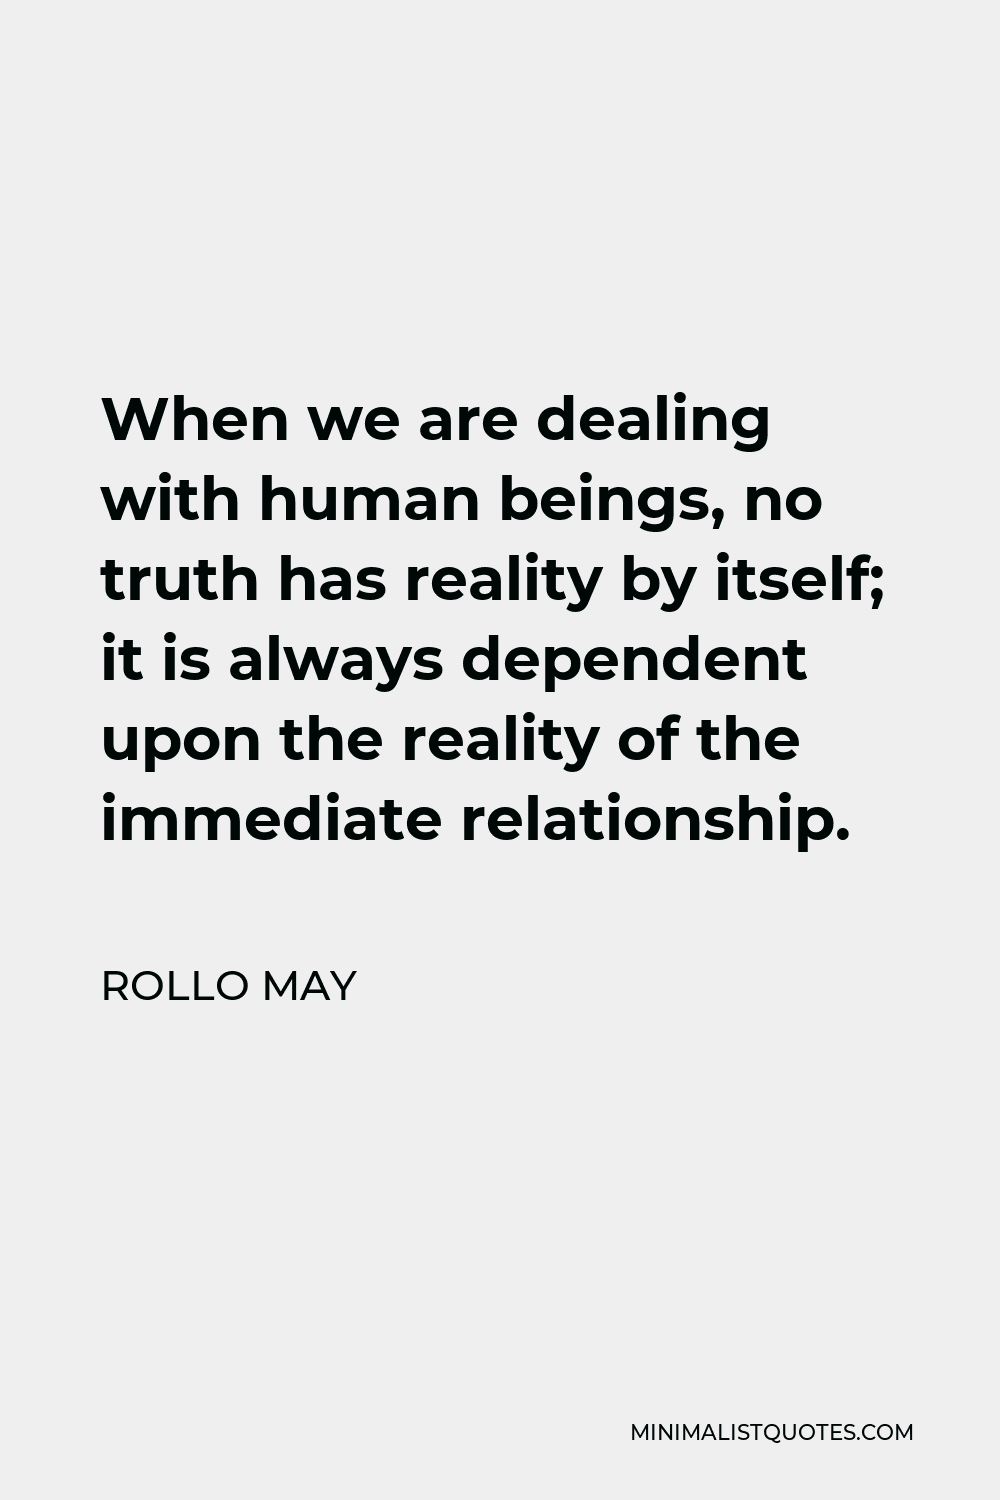 Rollo May Quote - When we are dealing with human beings, no truth has reality by itself; it is always dependent upon the reality of the immediate relationship.